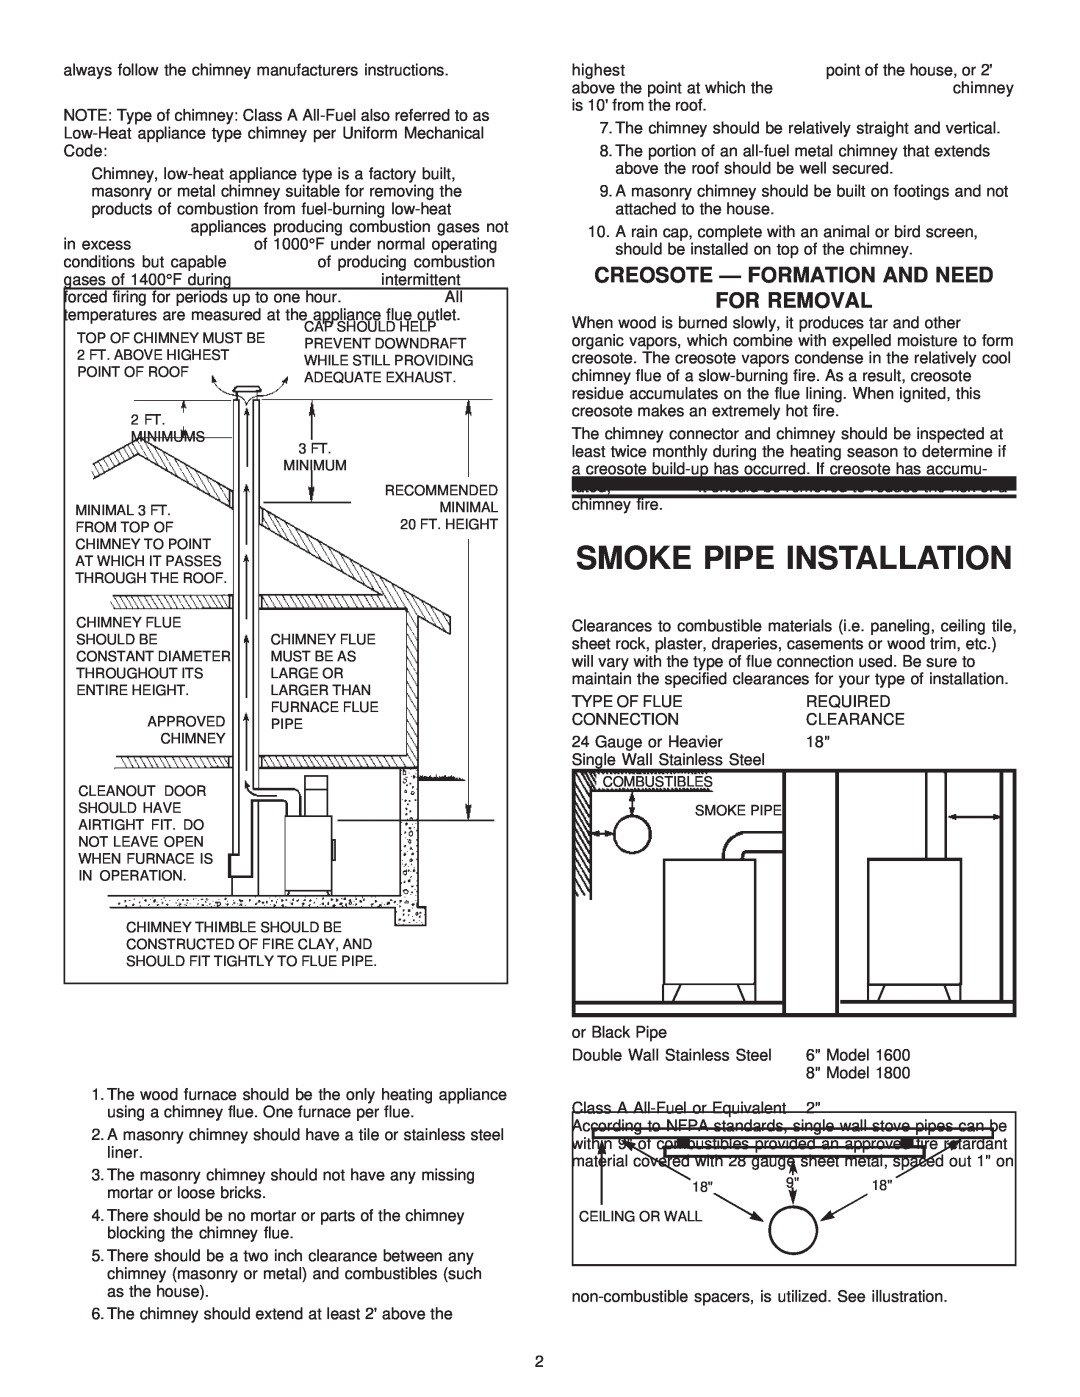 United States Stove 1800, 1600 manual Smoke Pipe Installation, Creosote - Formation And Need For Removal 